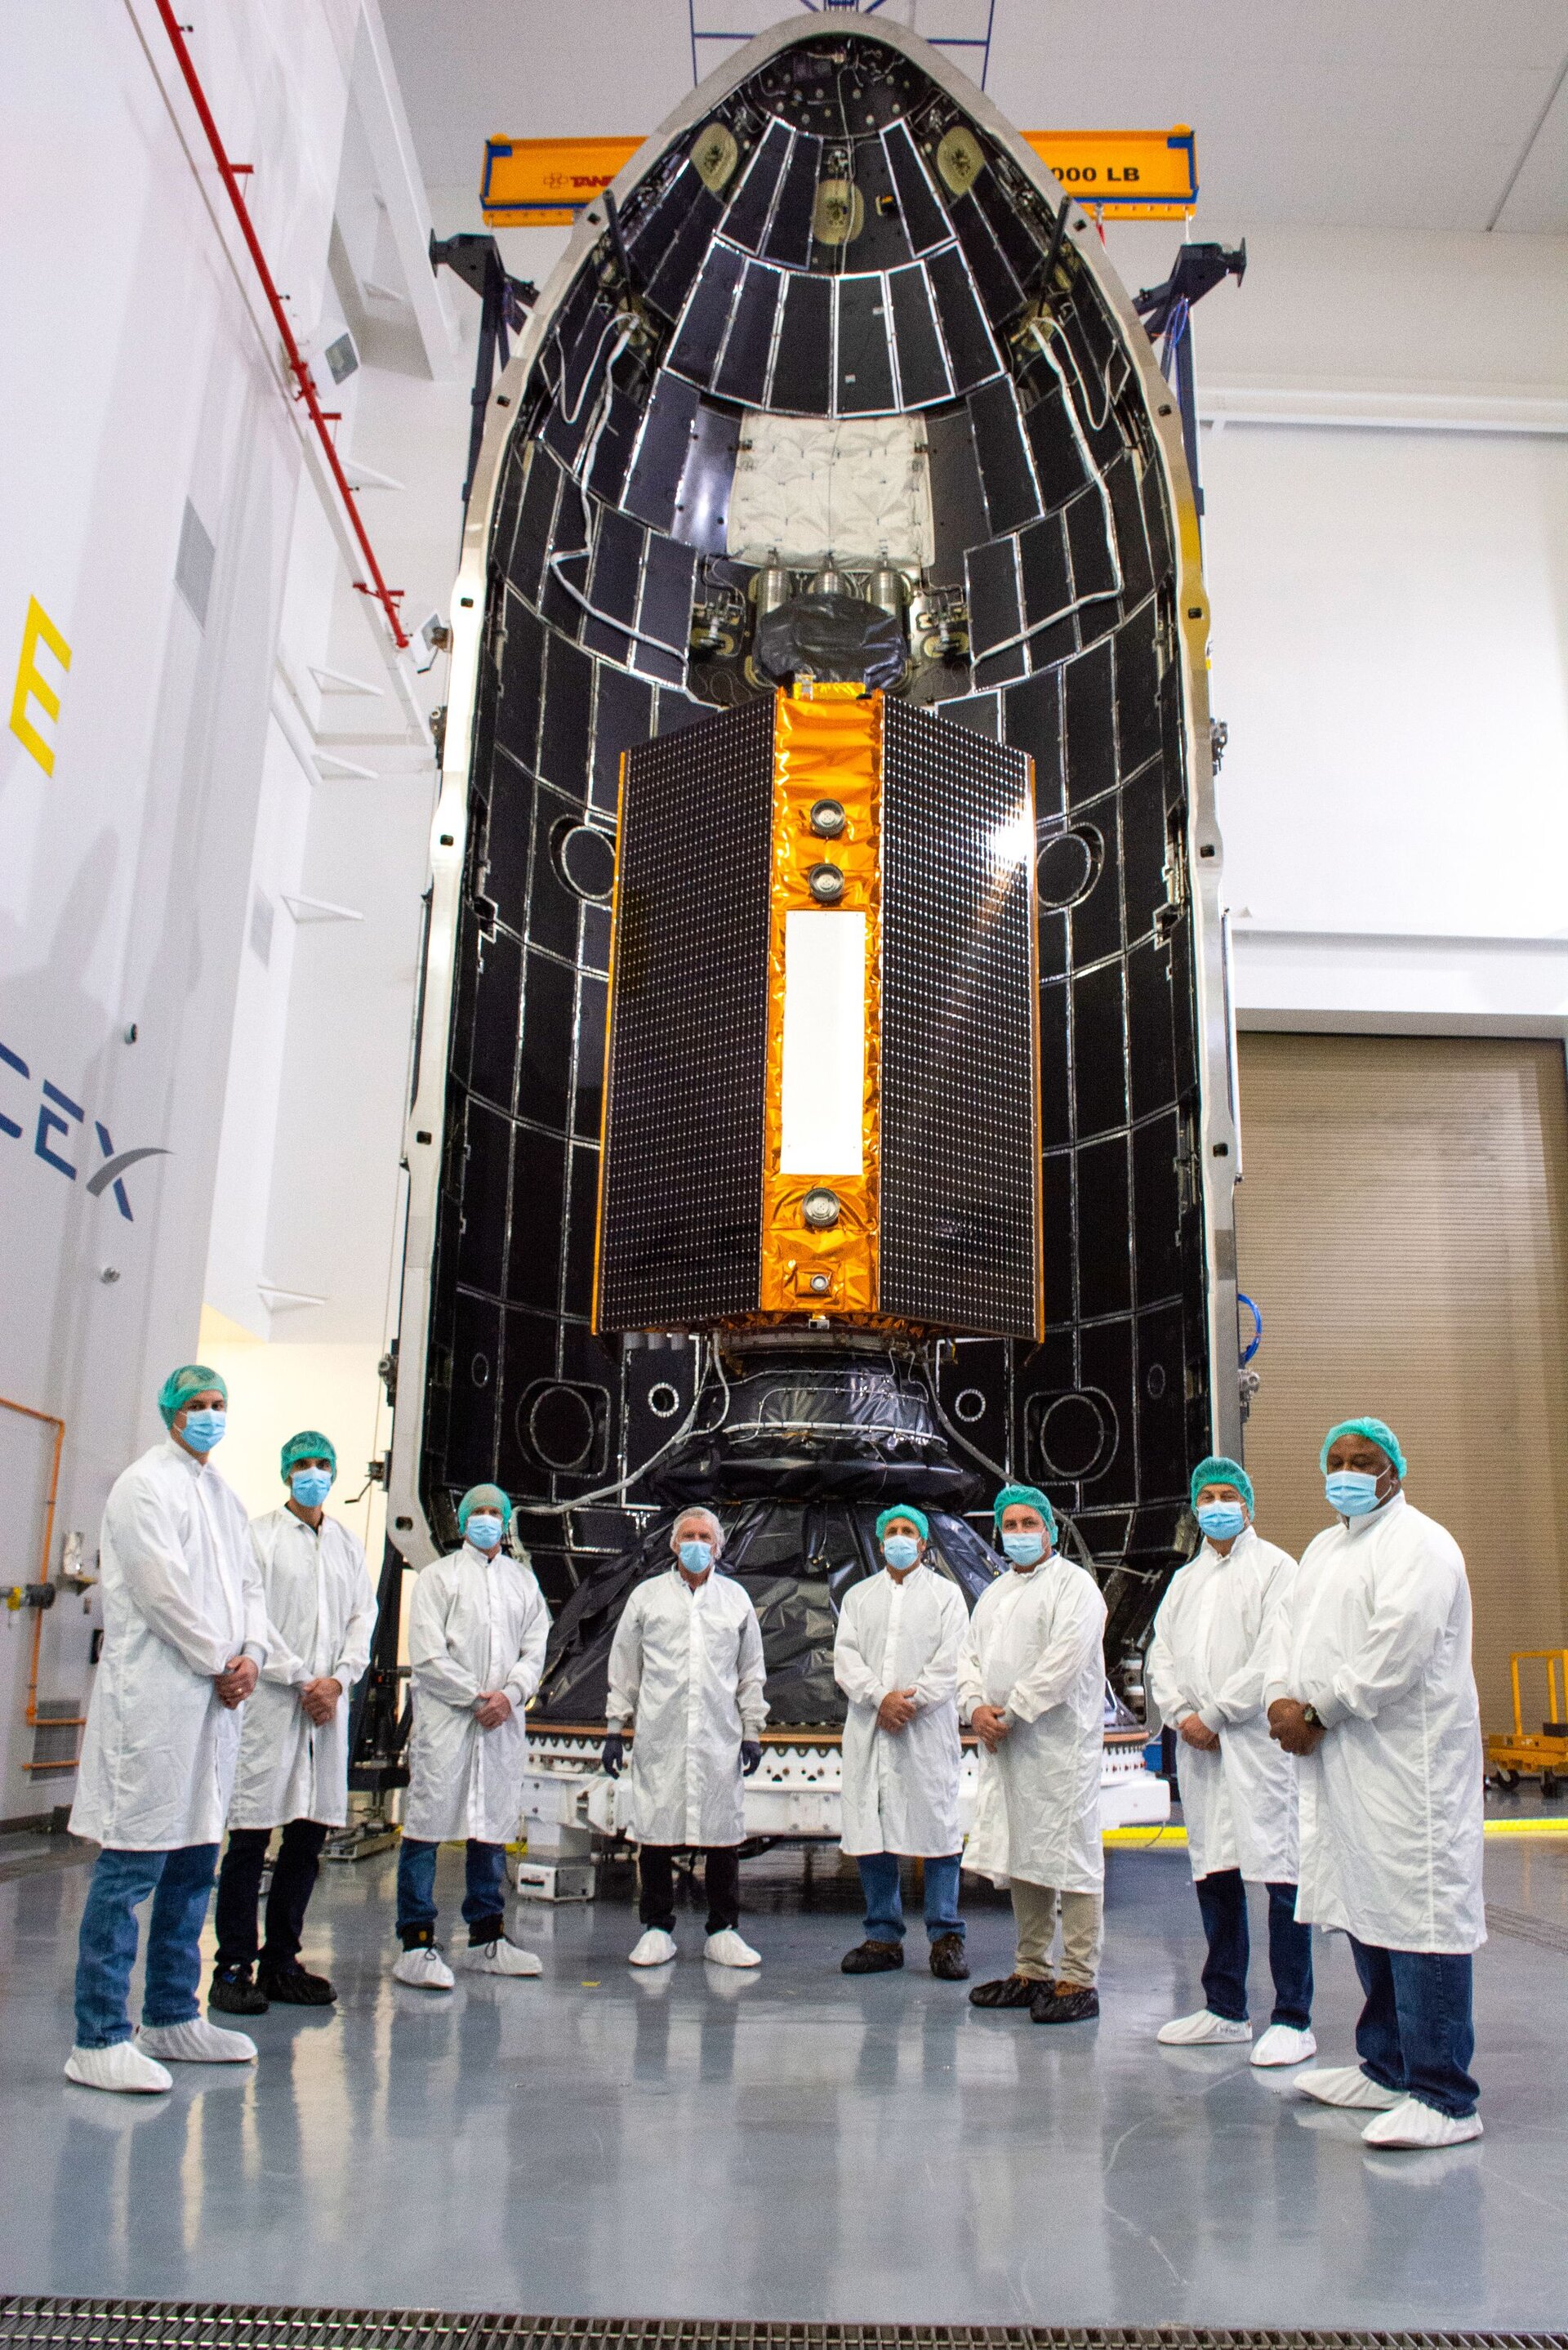 The launch campaign team in front of the satellite